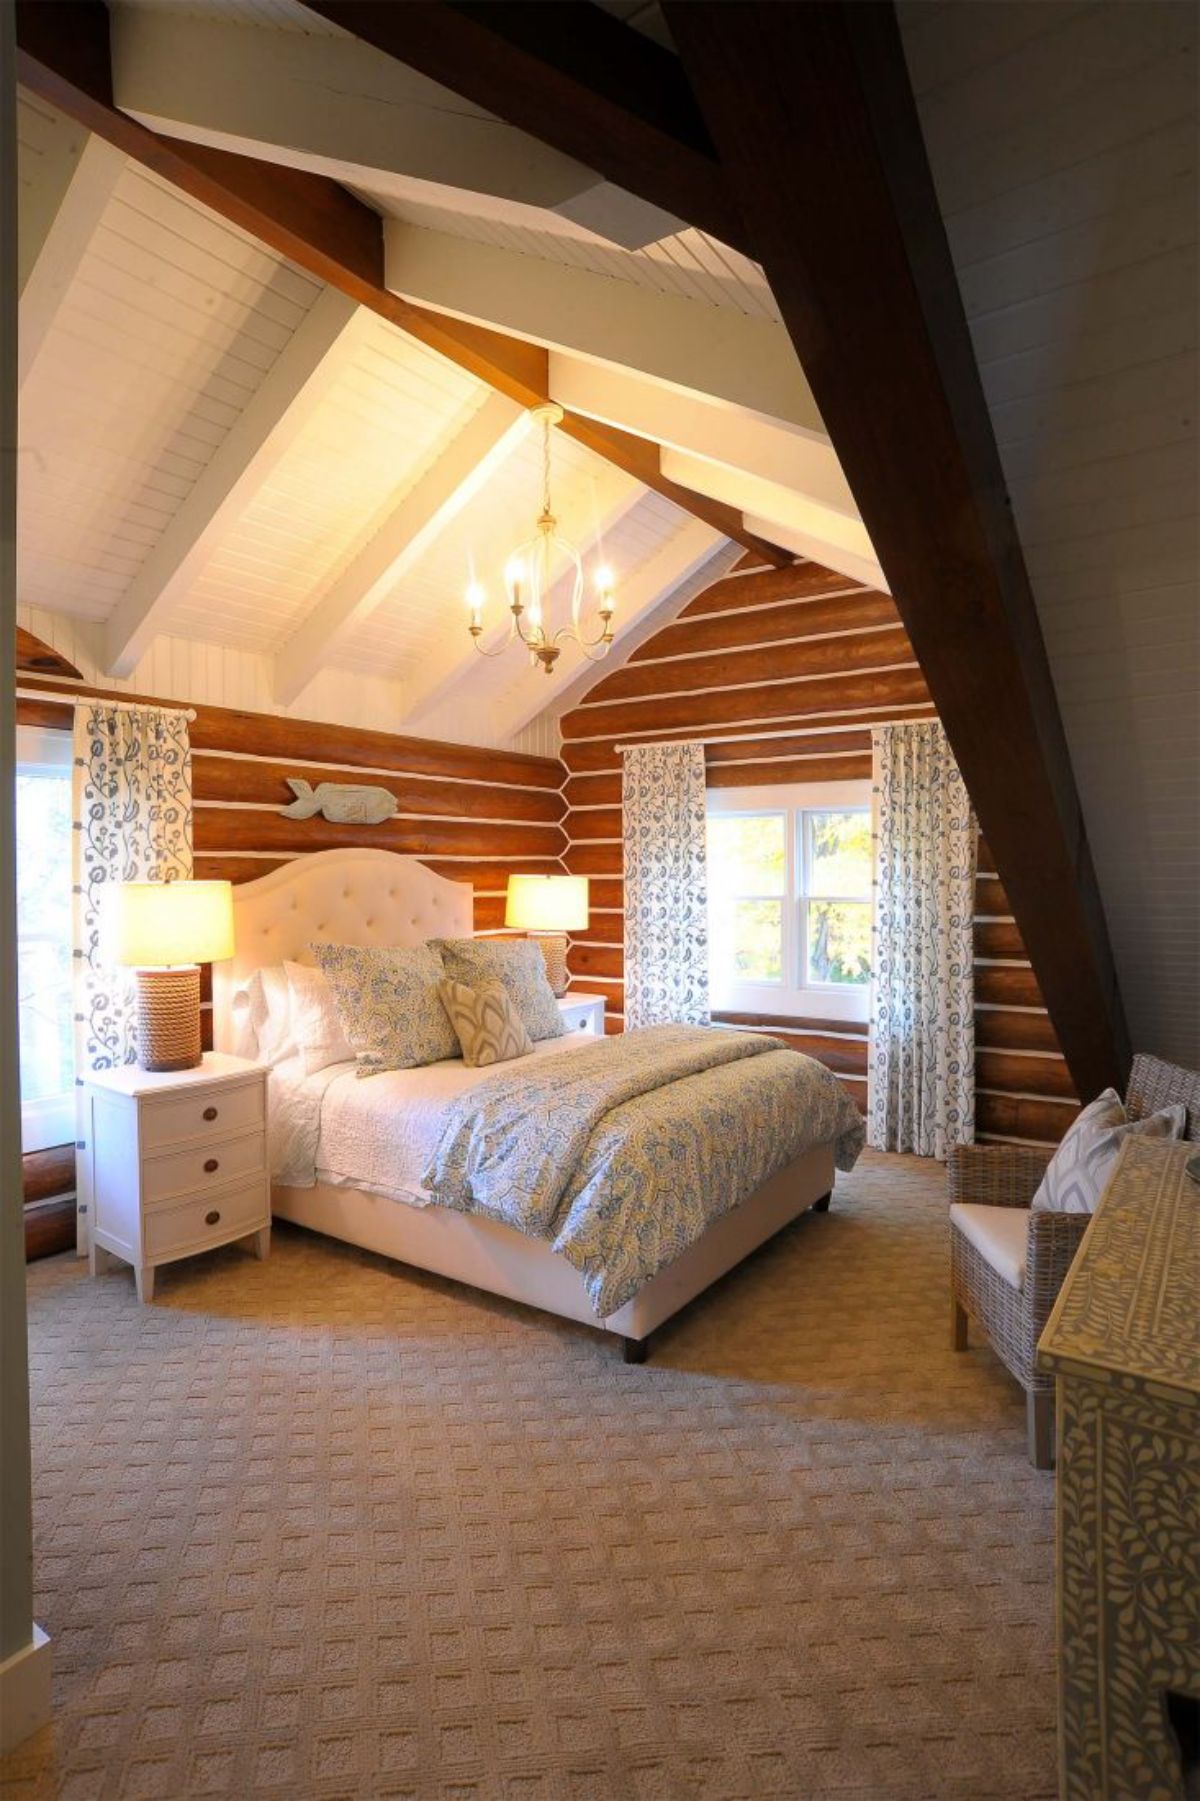 white bedding and bed frame in log cabin bedroom with chinked walls